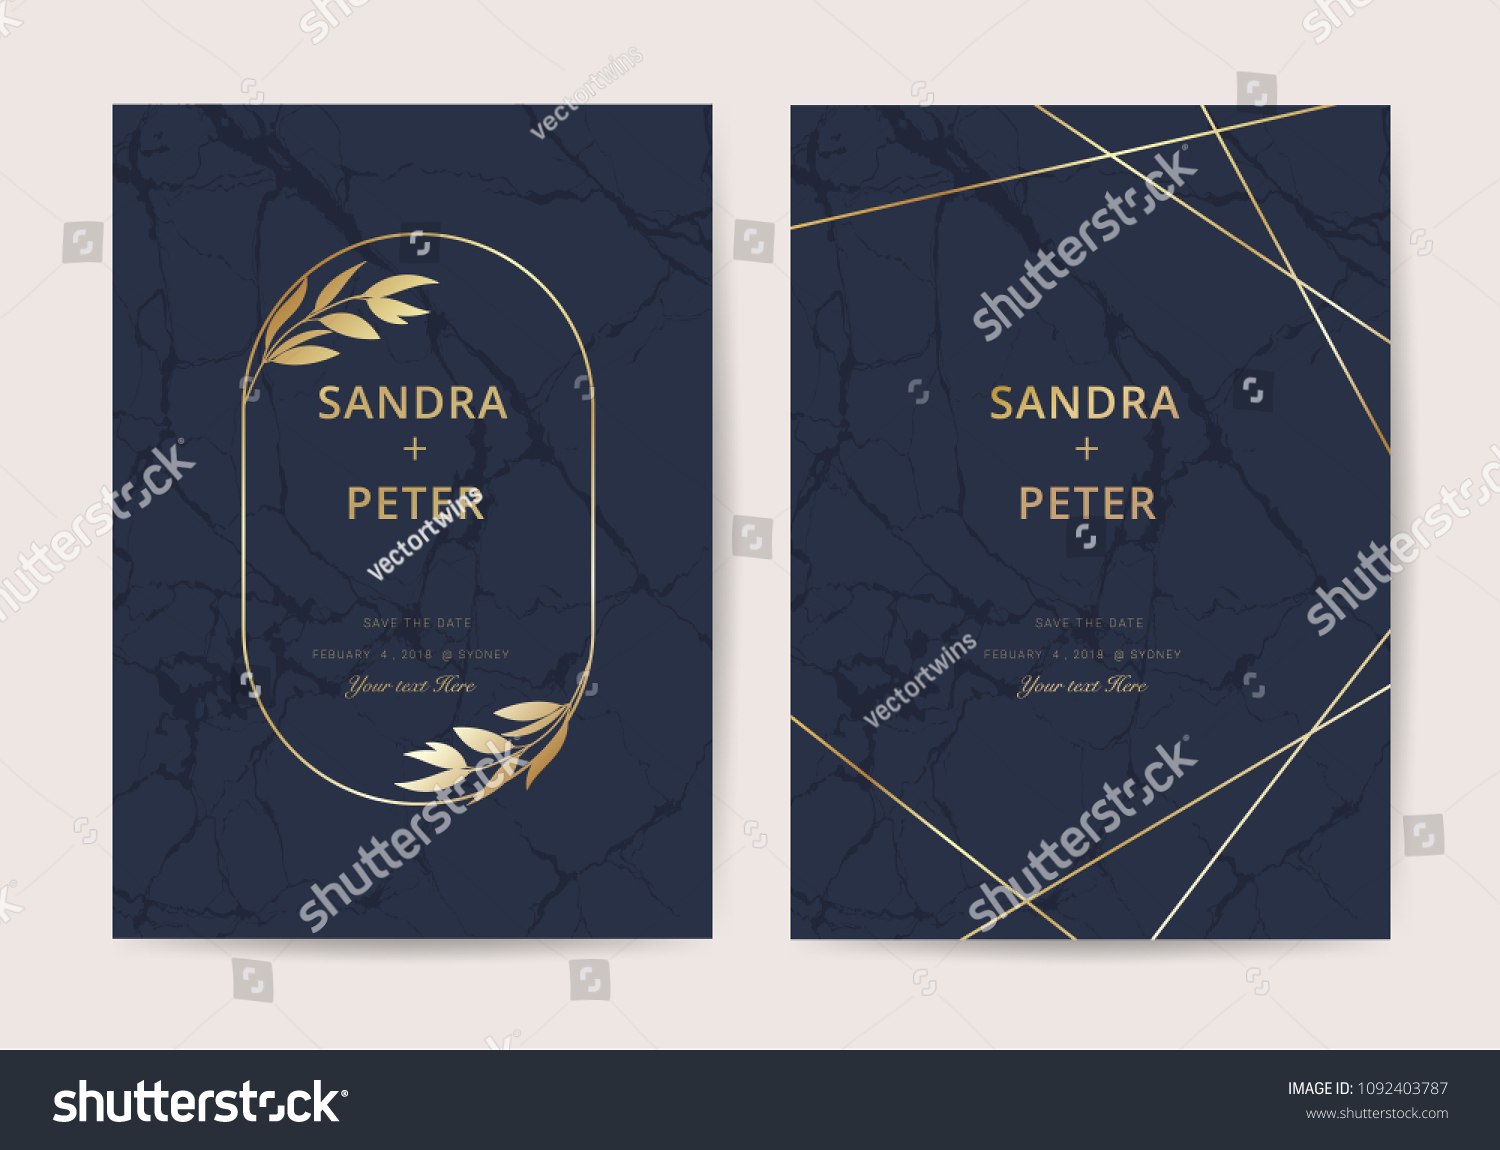 Wedding invitation cards with indigo marble texture background and gold geometric  line design vector. #1092403787